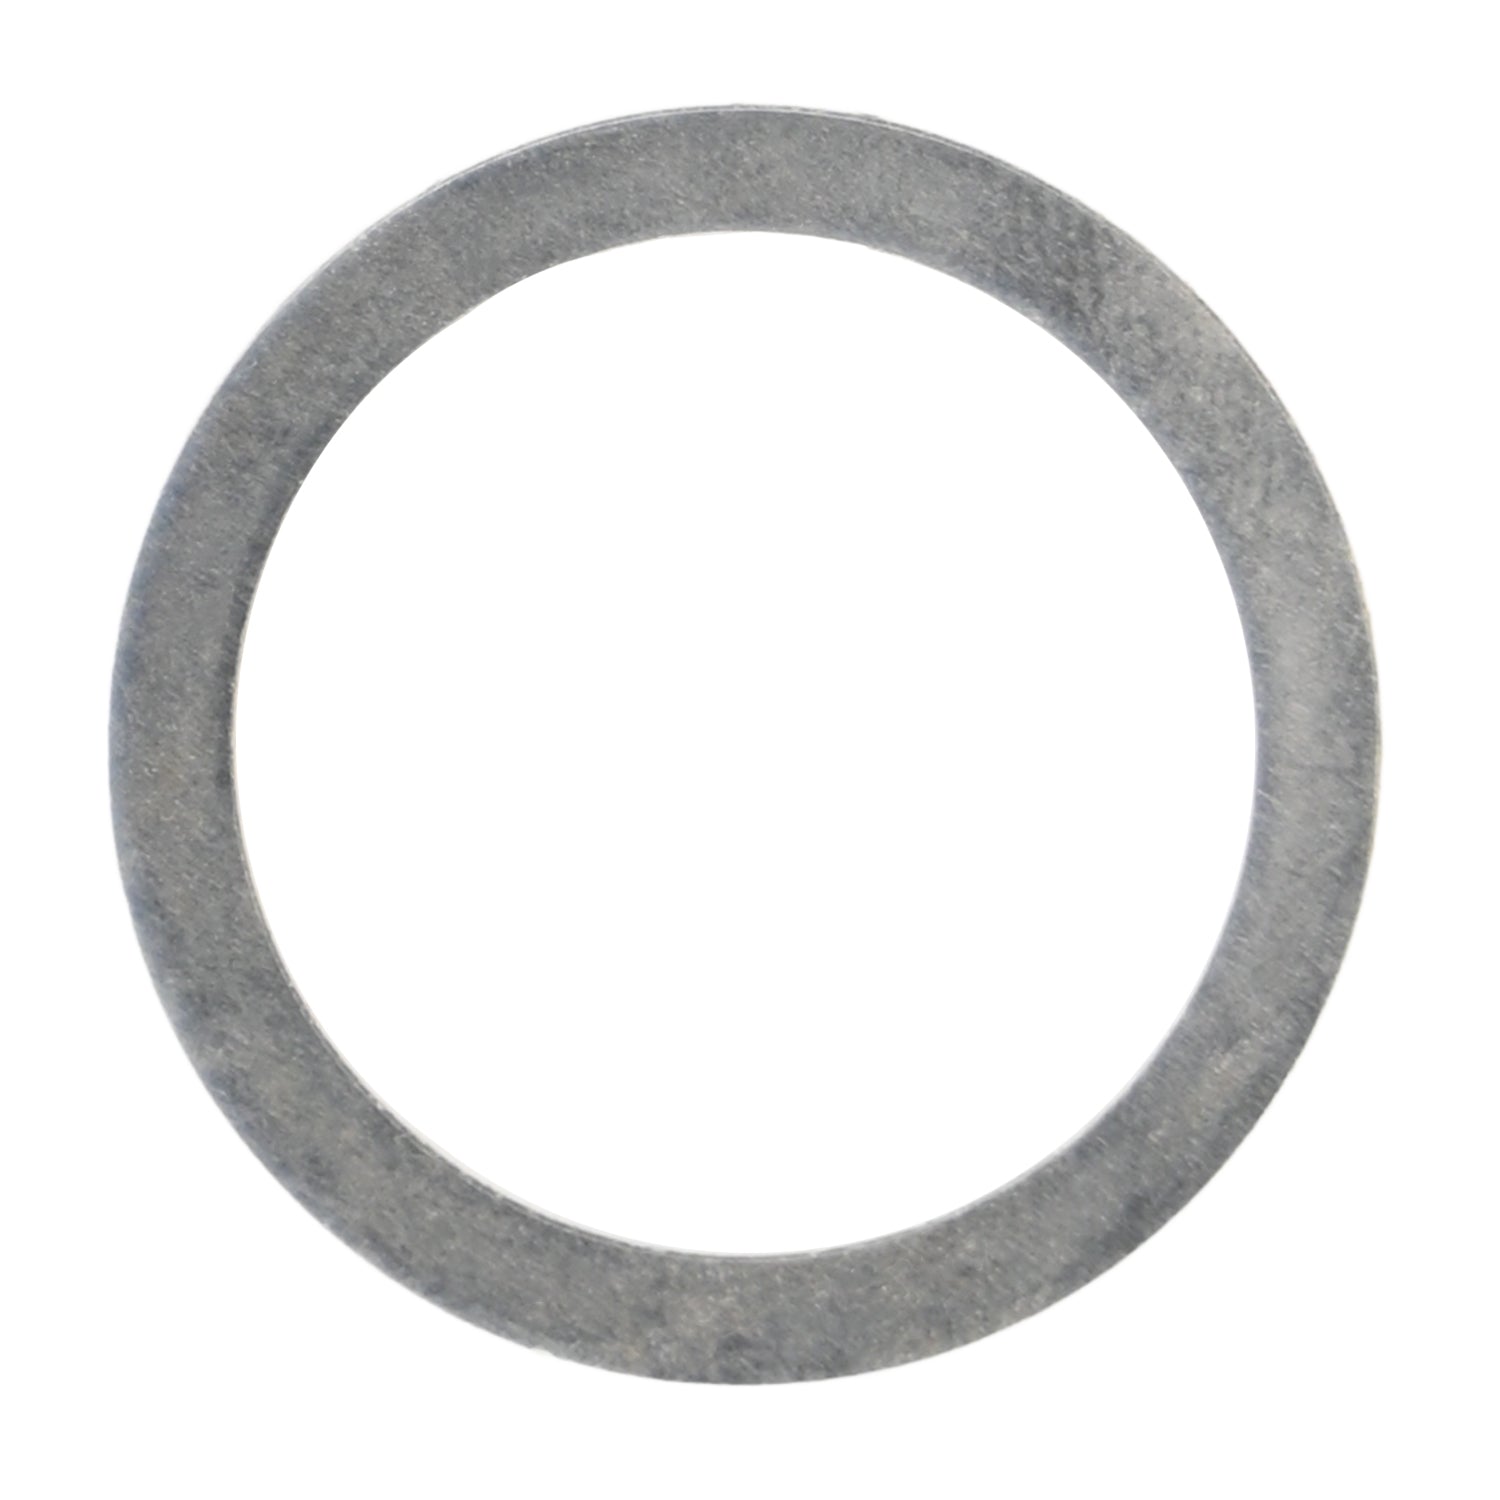 Flat, circular stainless steel shim on a white background. 